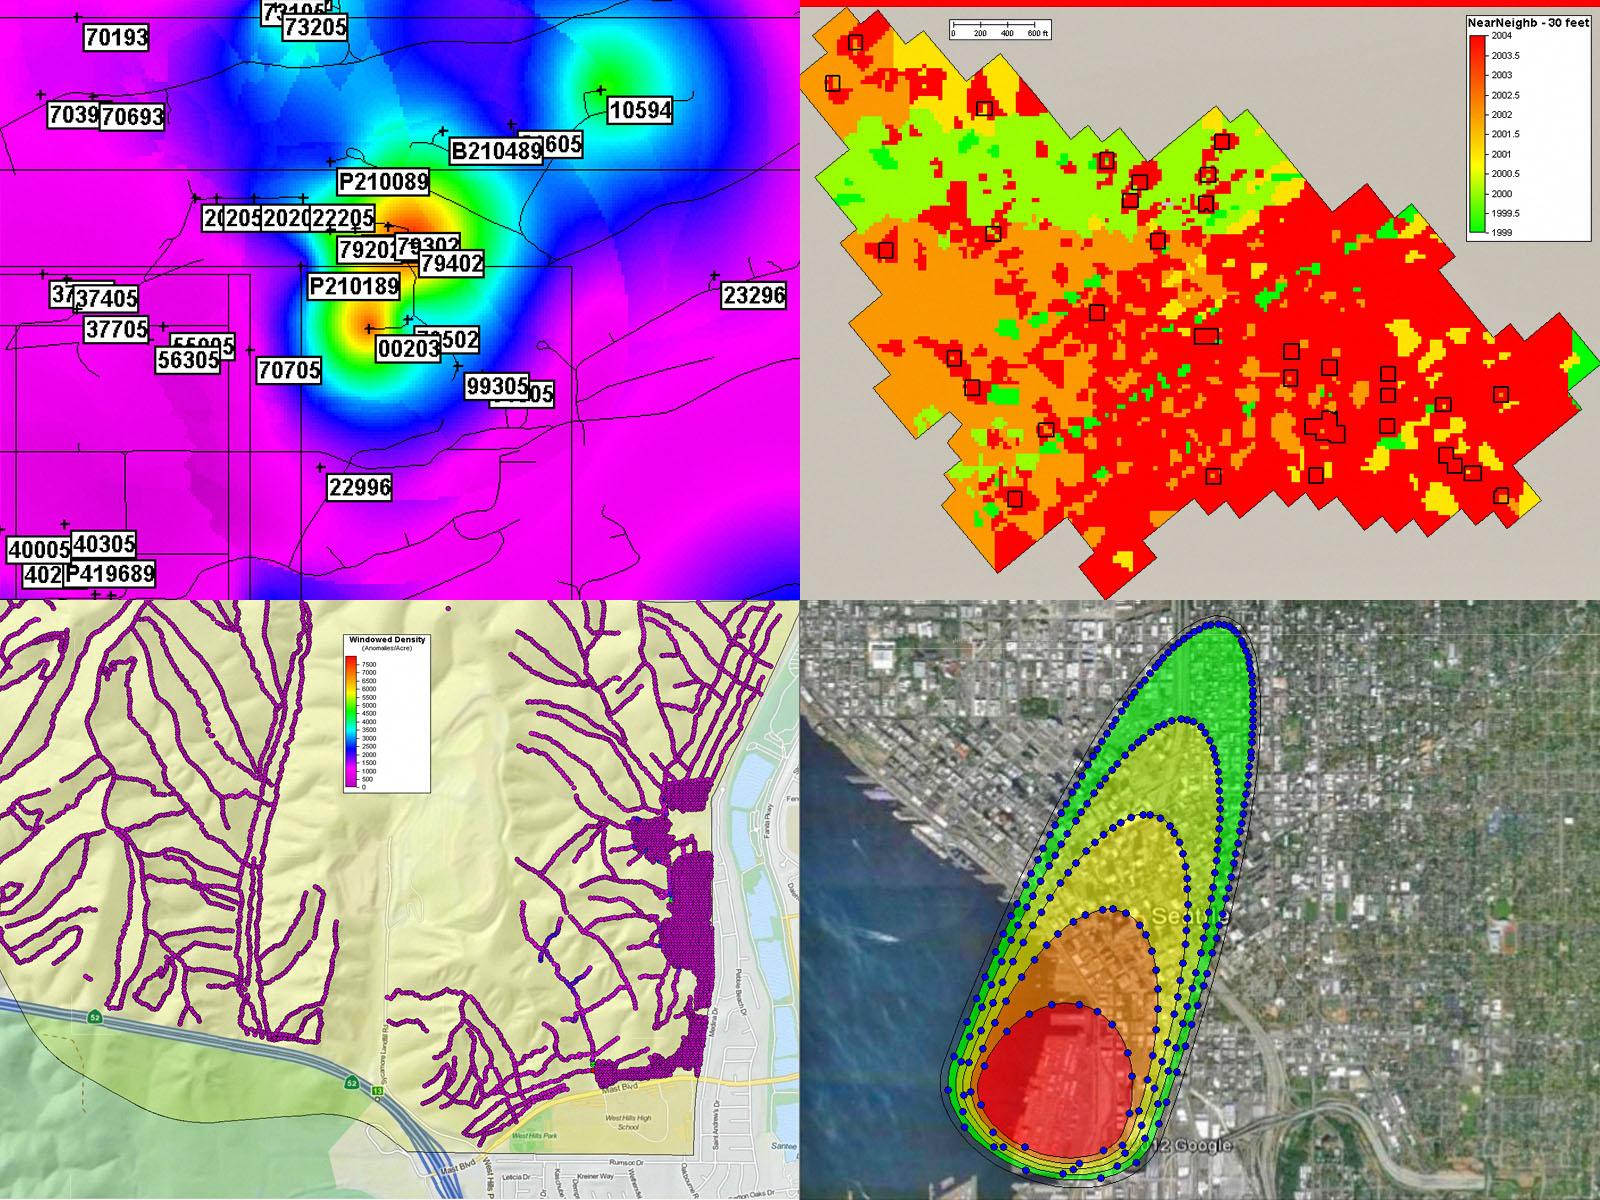 Heat maps generated by VSP.